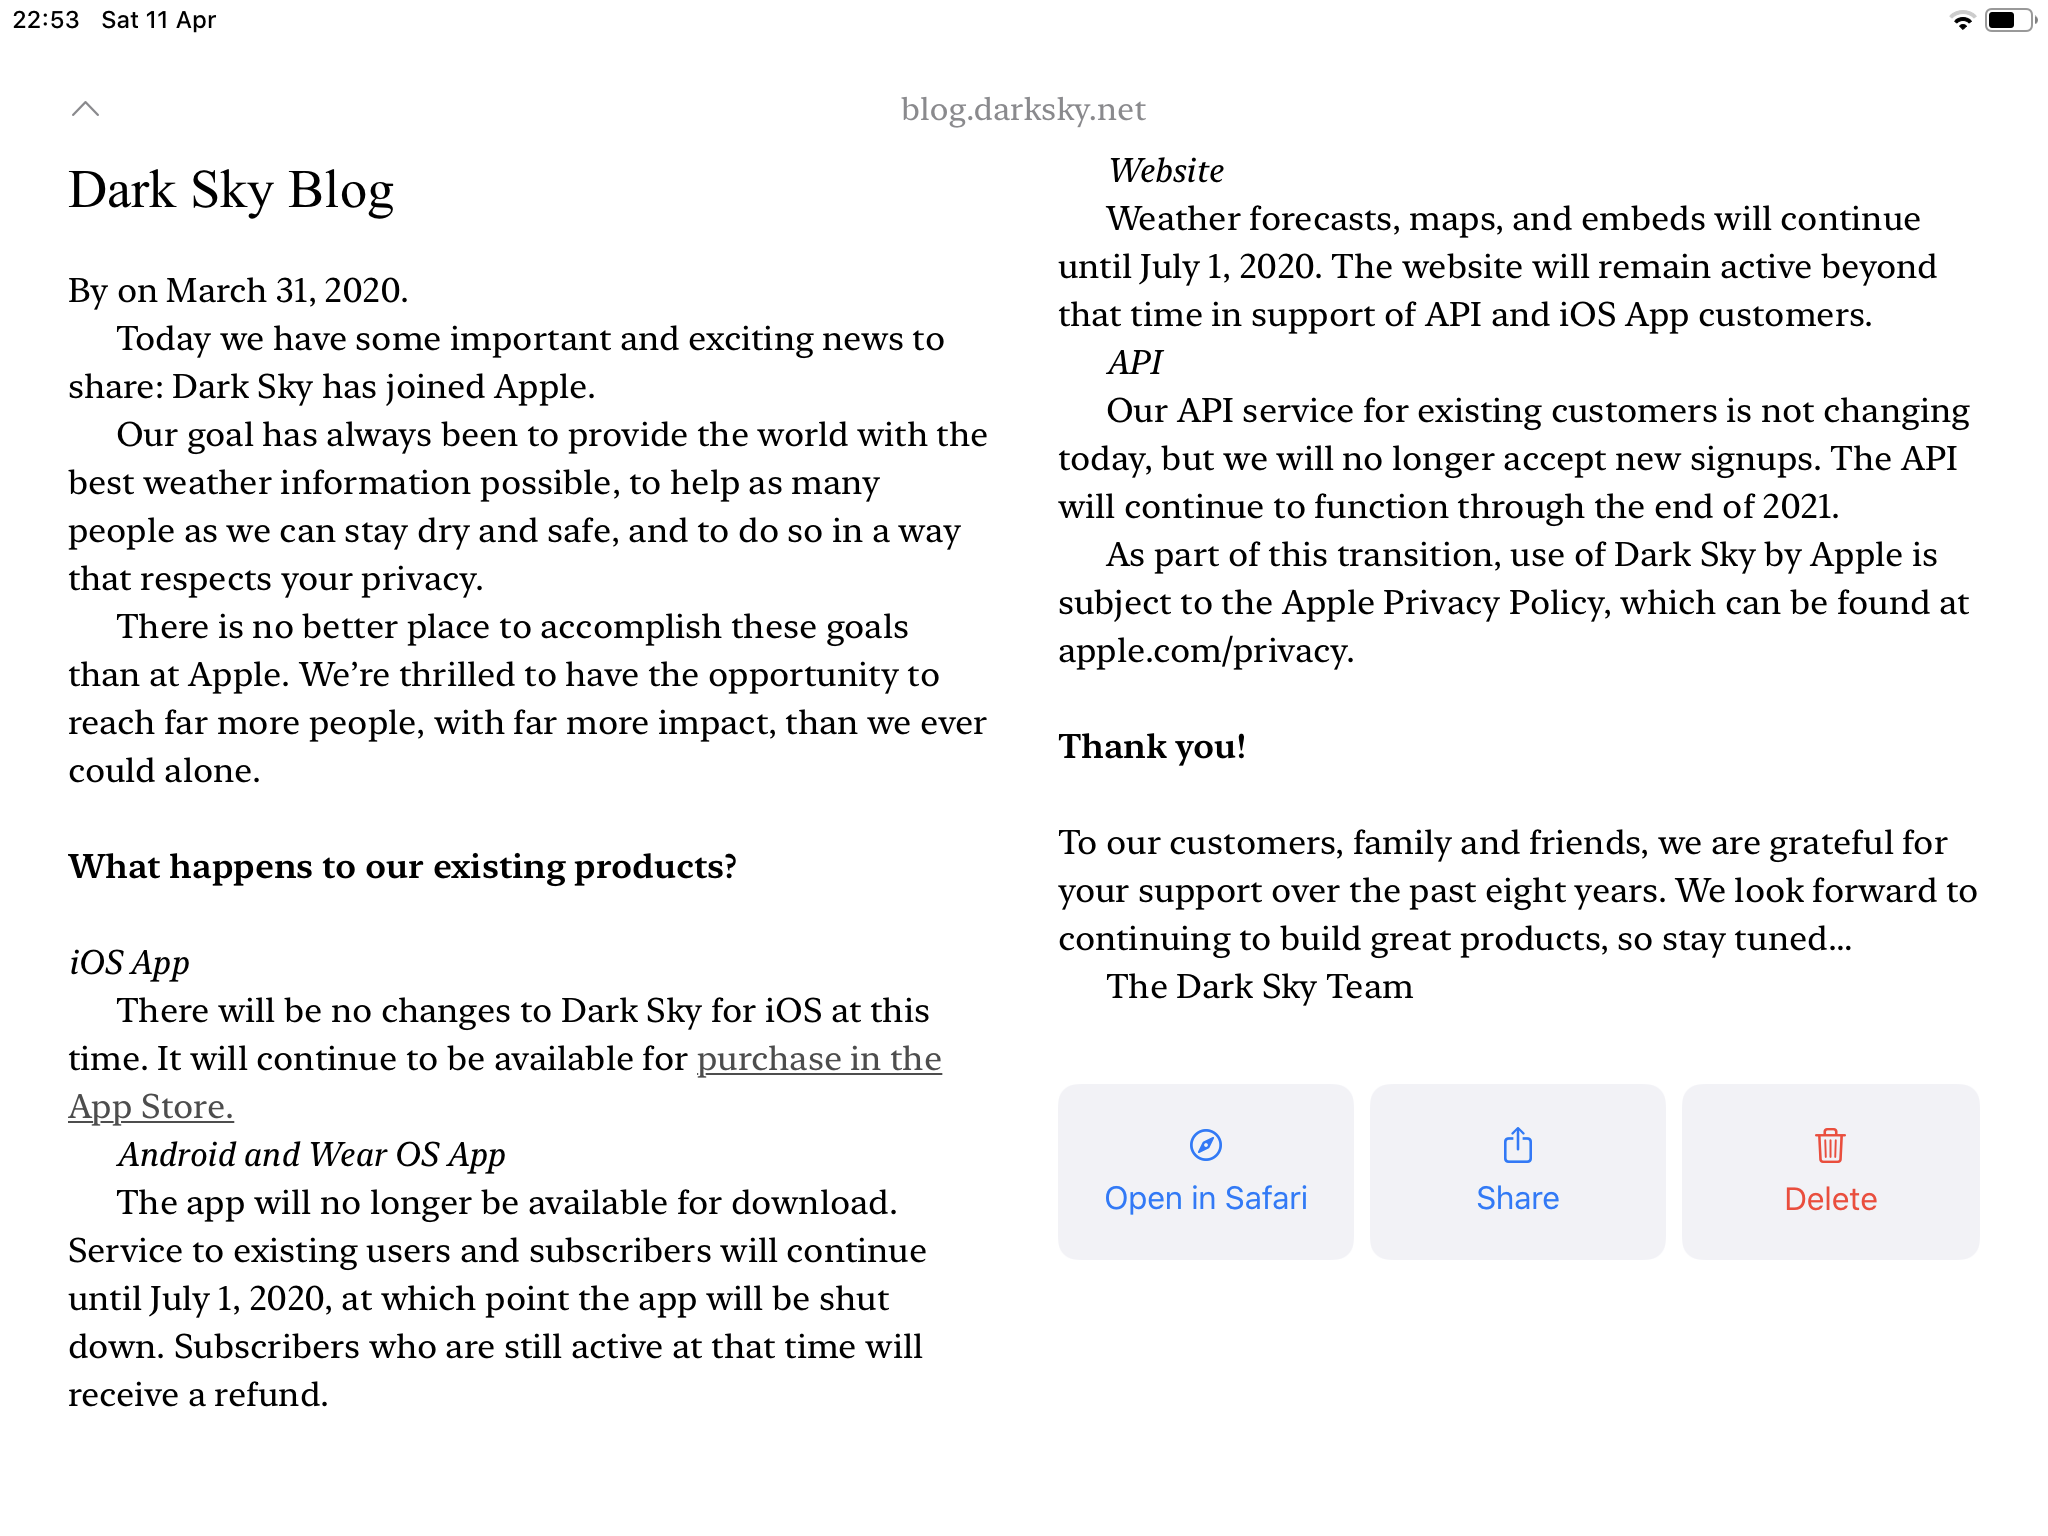 Screenshot of reading app on iPad. It shows two columns of text. The article is from the Dark Sky Blog. There are three buttons are at the bottom of the right-hand column: Open in Safari, Share, and Delete.